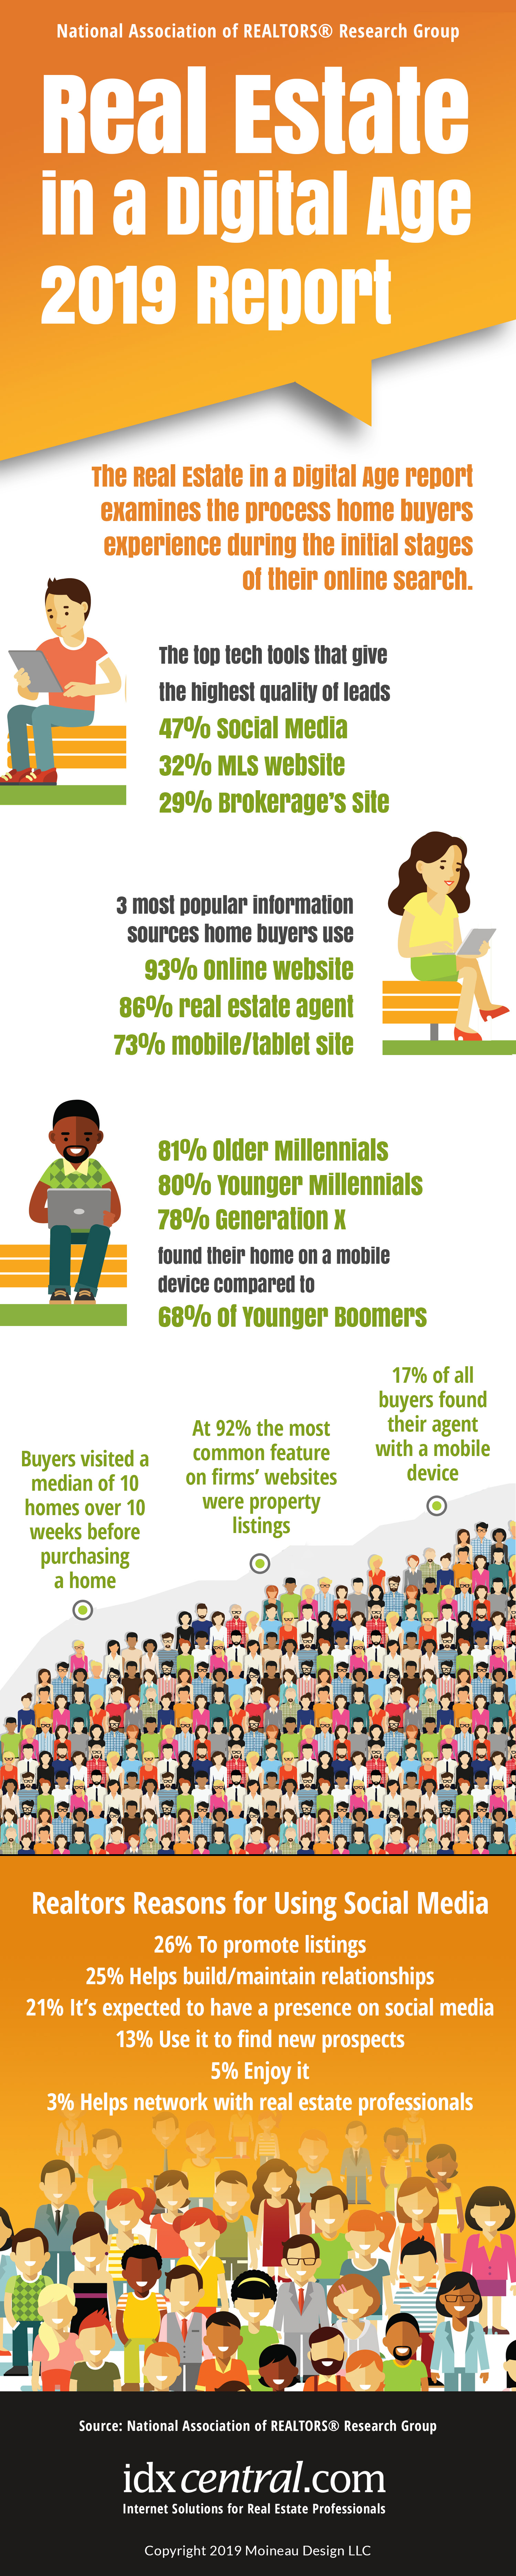 NAR Real Estate in the Digital Age 2019 Report